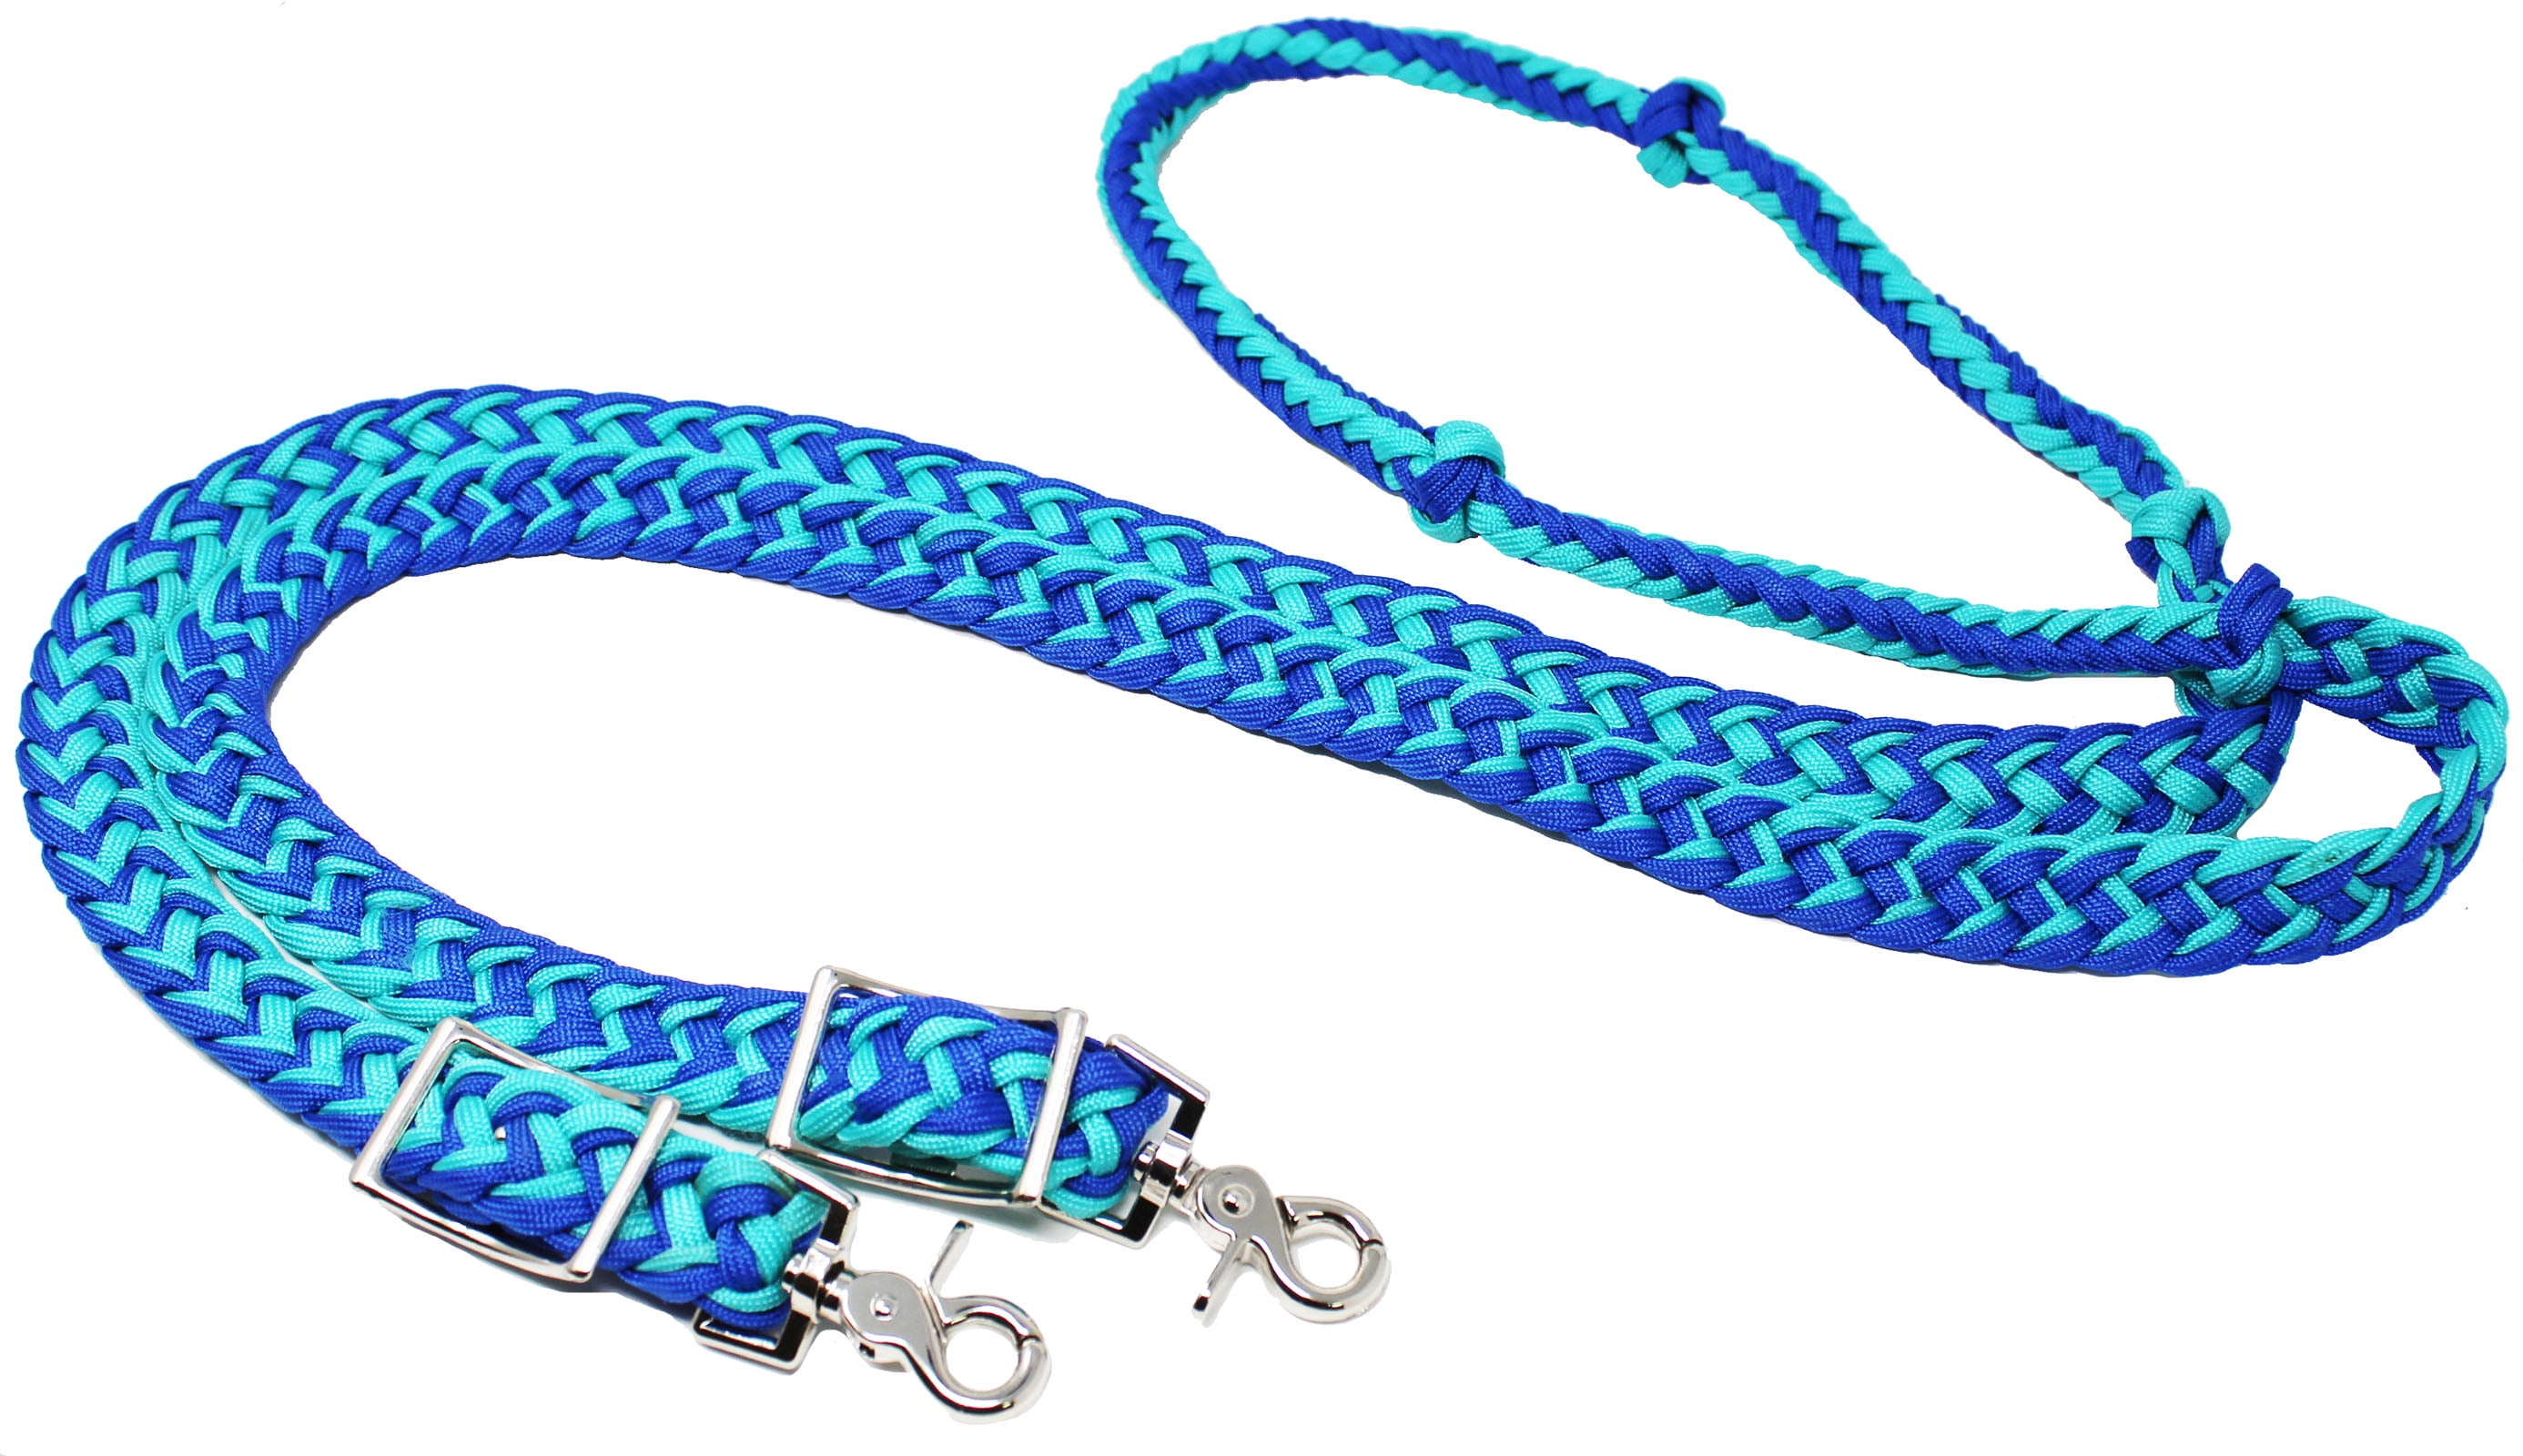 Western Set of 2 Nylon Braided and Knotted Horse Leads with Steel Snaps 